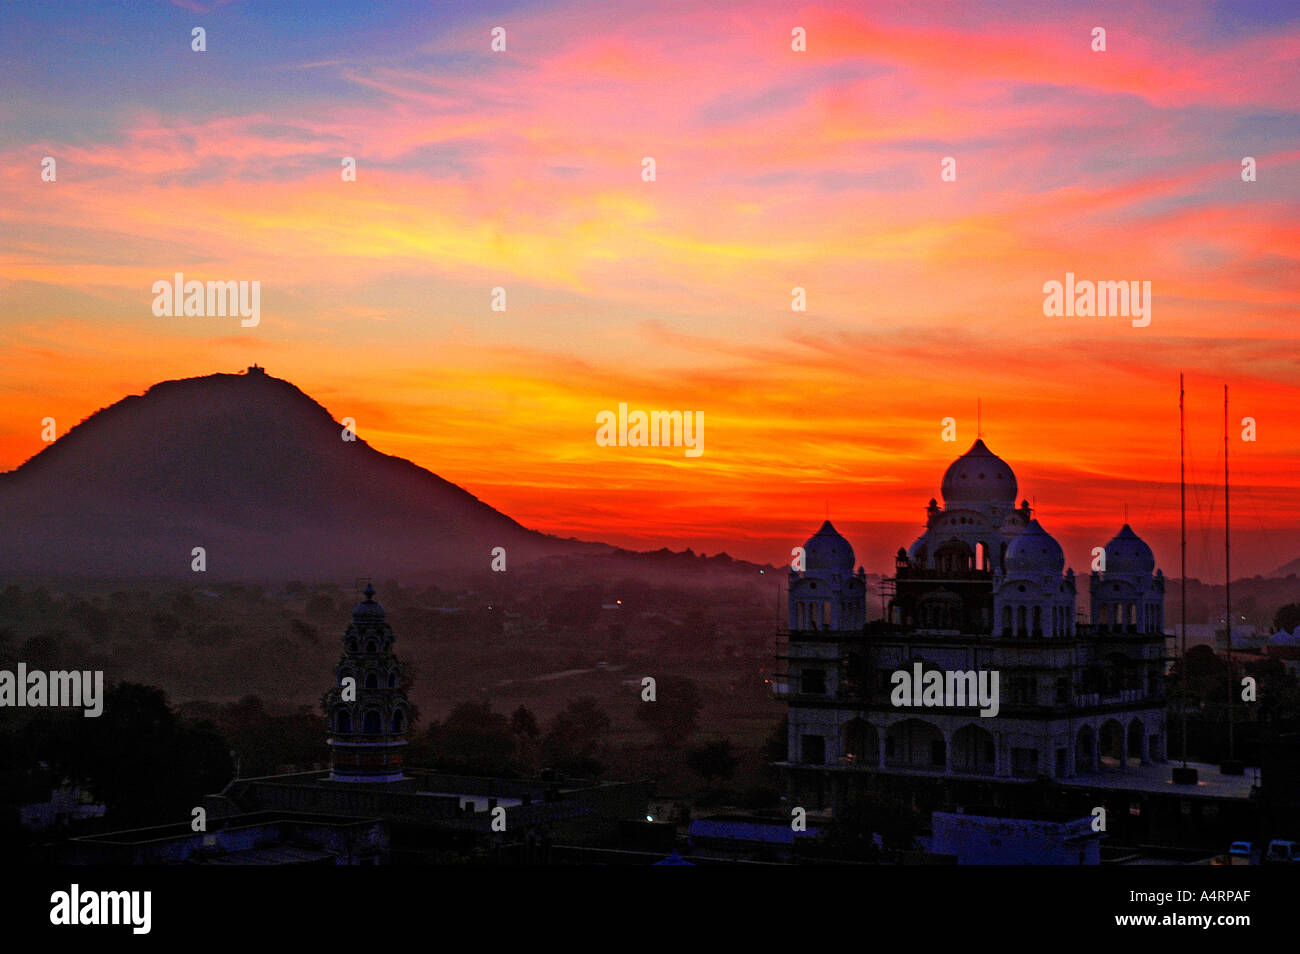 Sub98551 Red Orange Hues Of Sunset Over A Temple And Hill - 